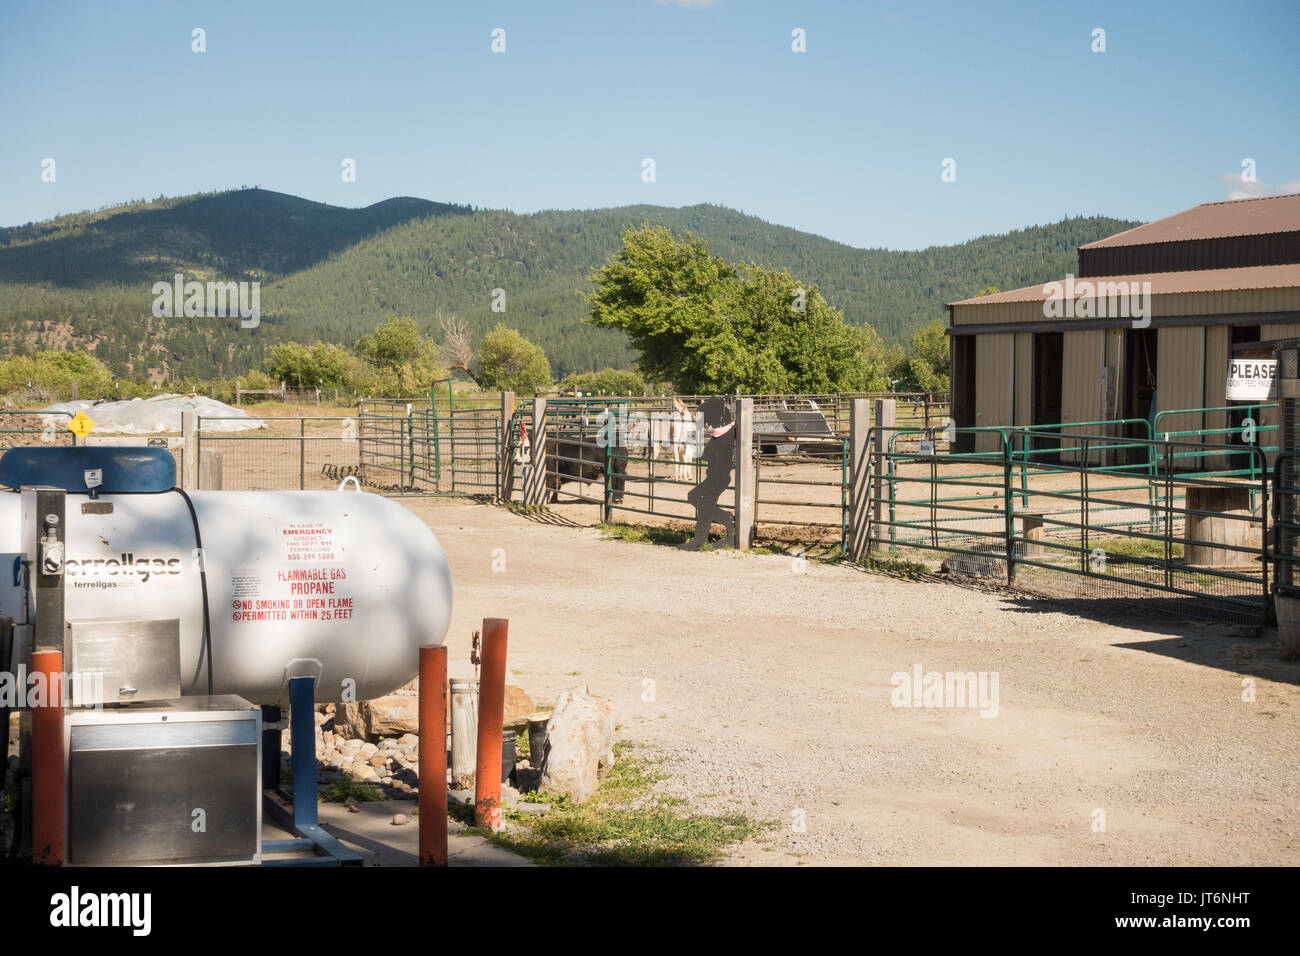 Propane gas tank at the gas station in Sierra Valley, CA Stock Photo